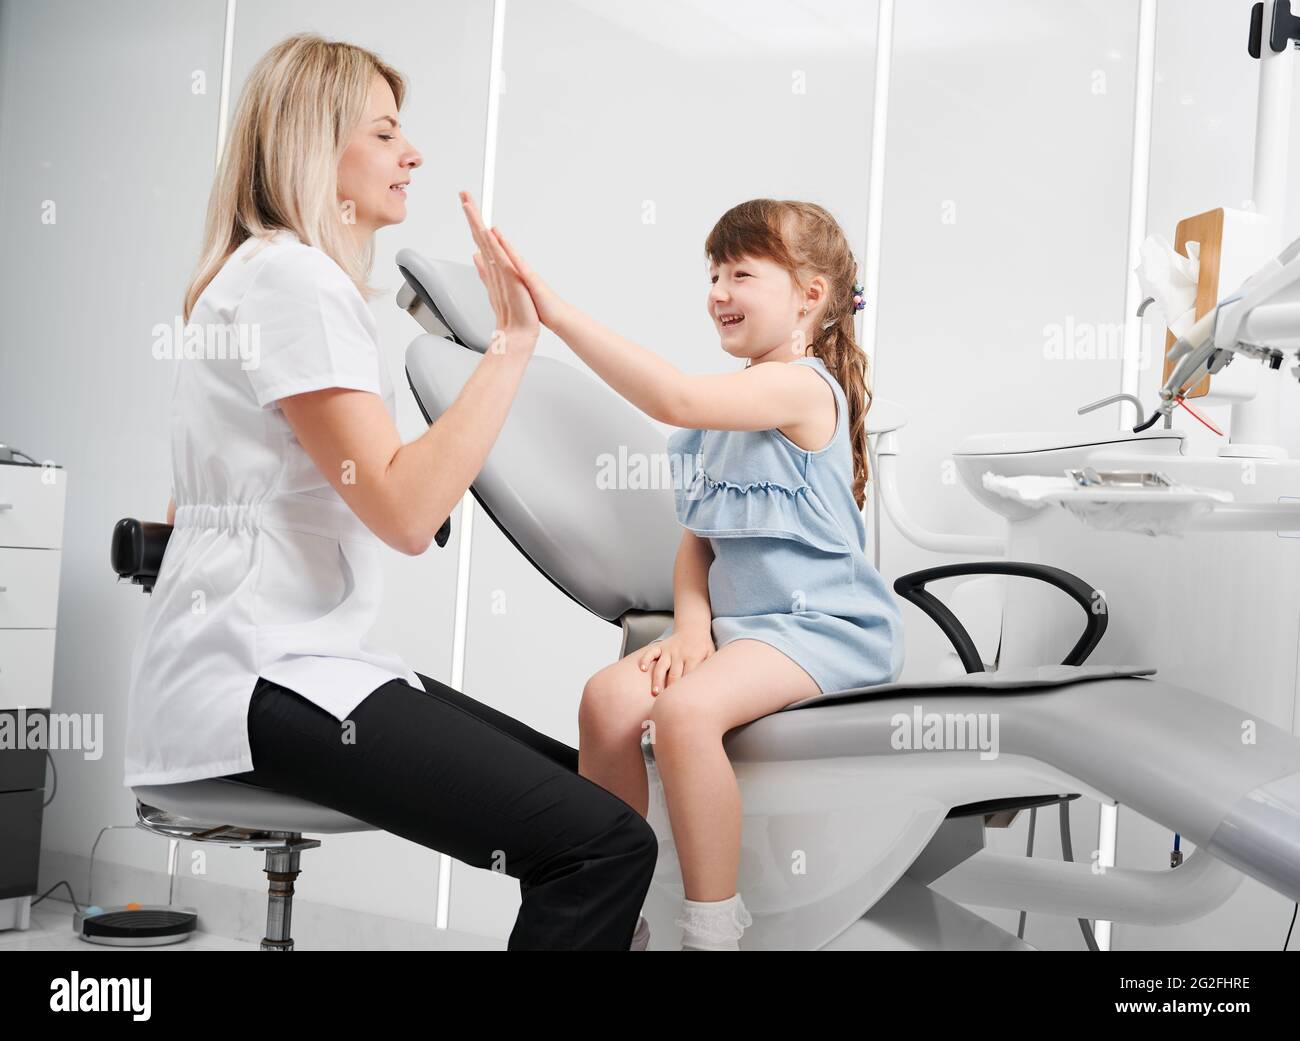 Cute little girl and female dentist giving high five after dental procedure. Smiling child sitting on dental chair and slapping hands with doctor. Concept of pediatric dentistry and dental care. Stock Photo